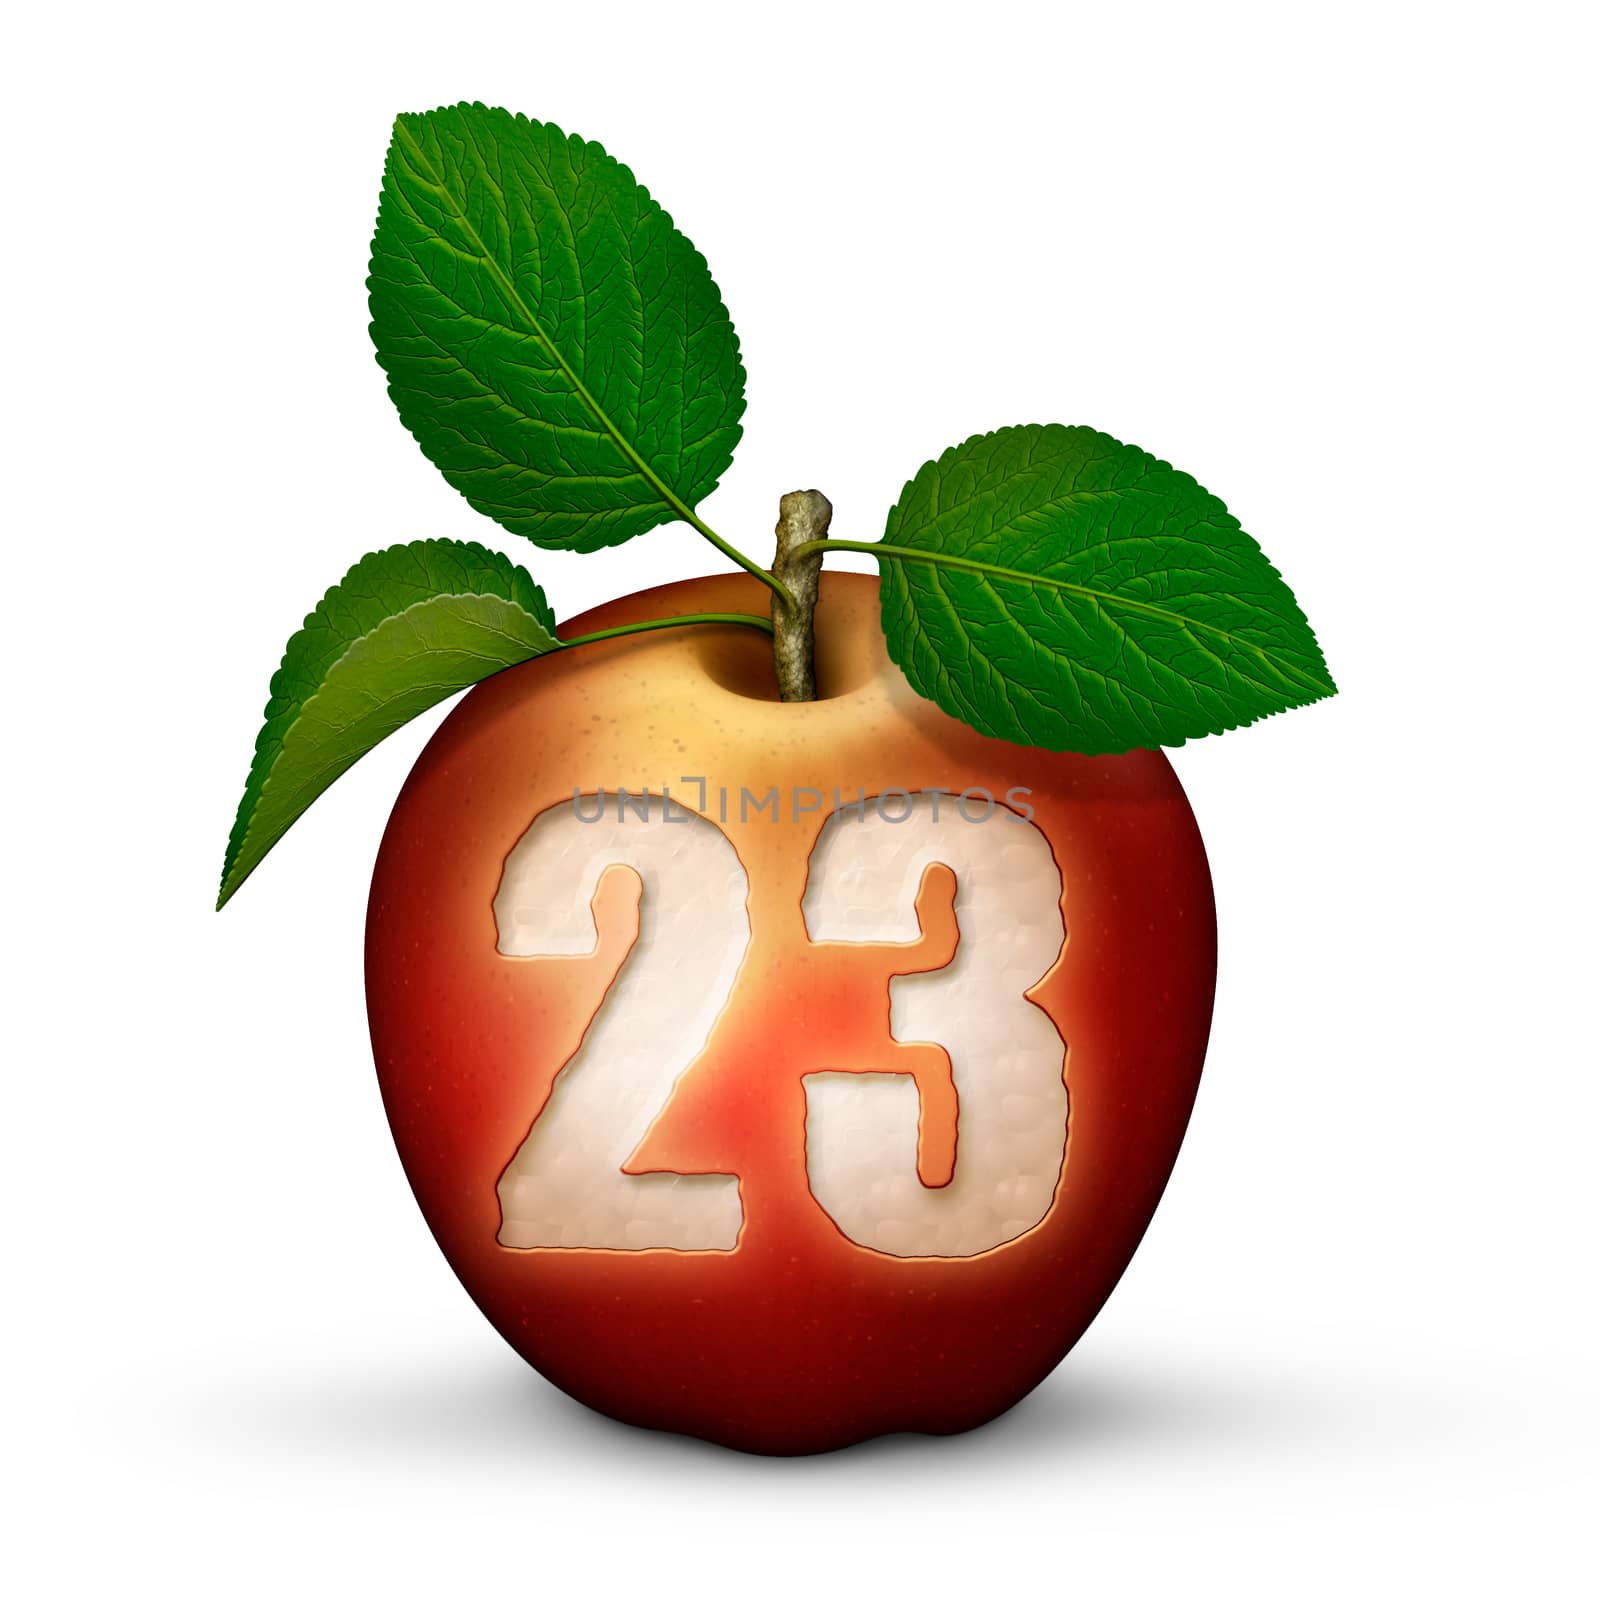 3D illustration of an apple with the number 23 bitten out of it.